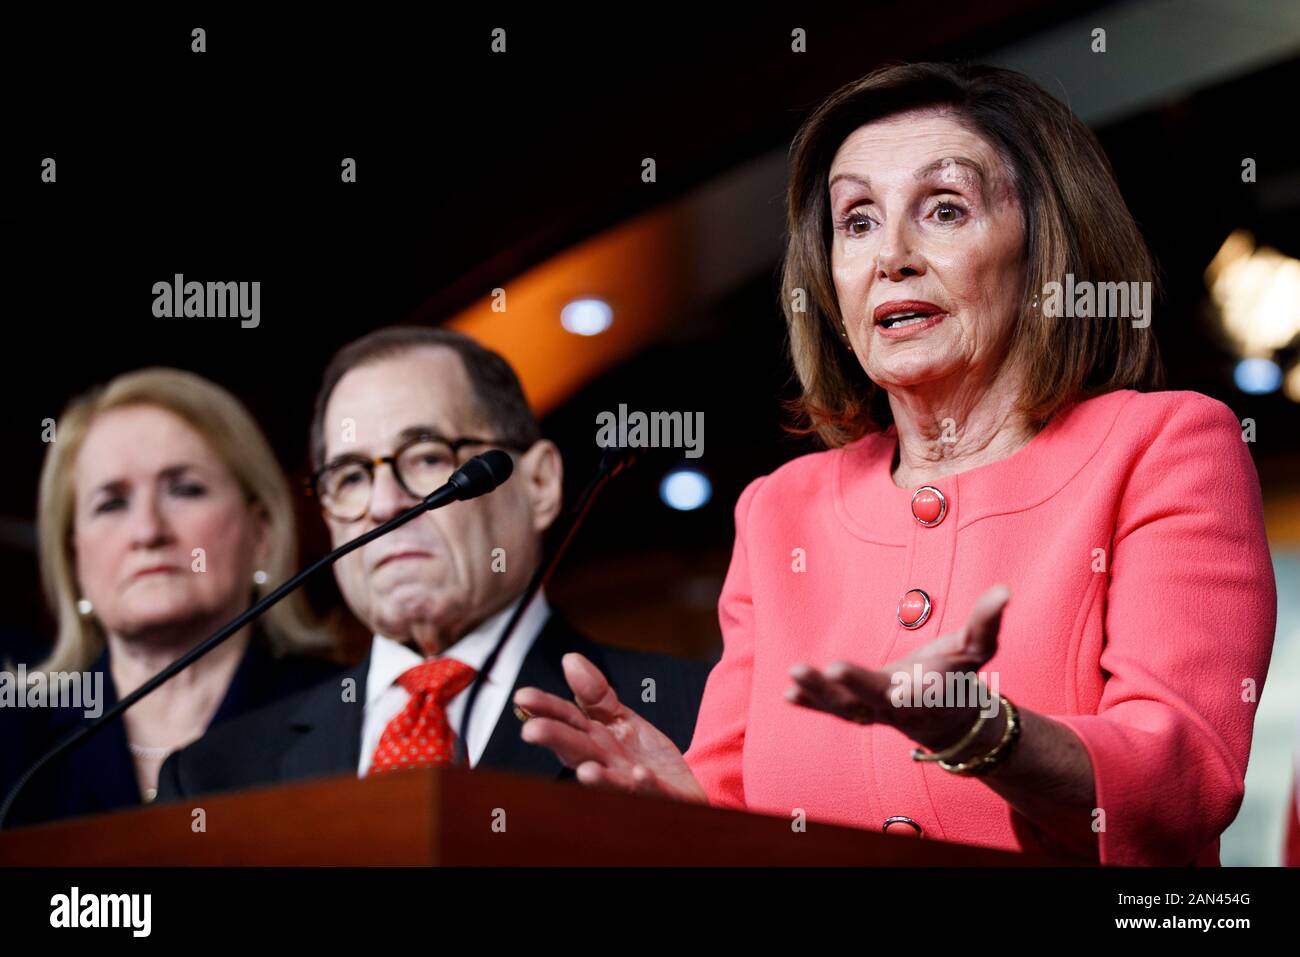 Washington, USA. 15th Jan, 2020. U.S. House Speaker Nancy Pelosi (R) speaks during a press conference in Washington, DC, the United States, on Jan. 15, 2020. The U.S. House of Representatives officially sent impeachment articles against President Donald Trump to the Senate on Wednesday evening to allow a trial to get underway. Credit: Ting Shen/Xinhua/Alamy Live News Stock Photo